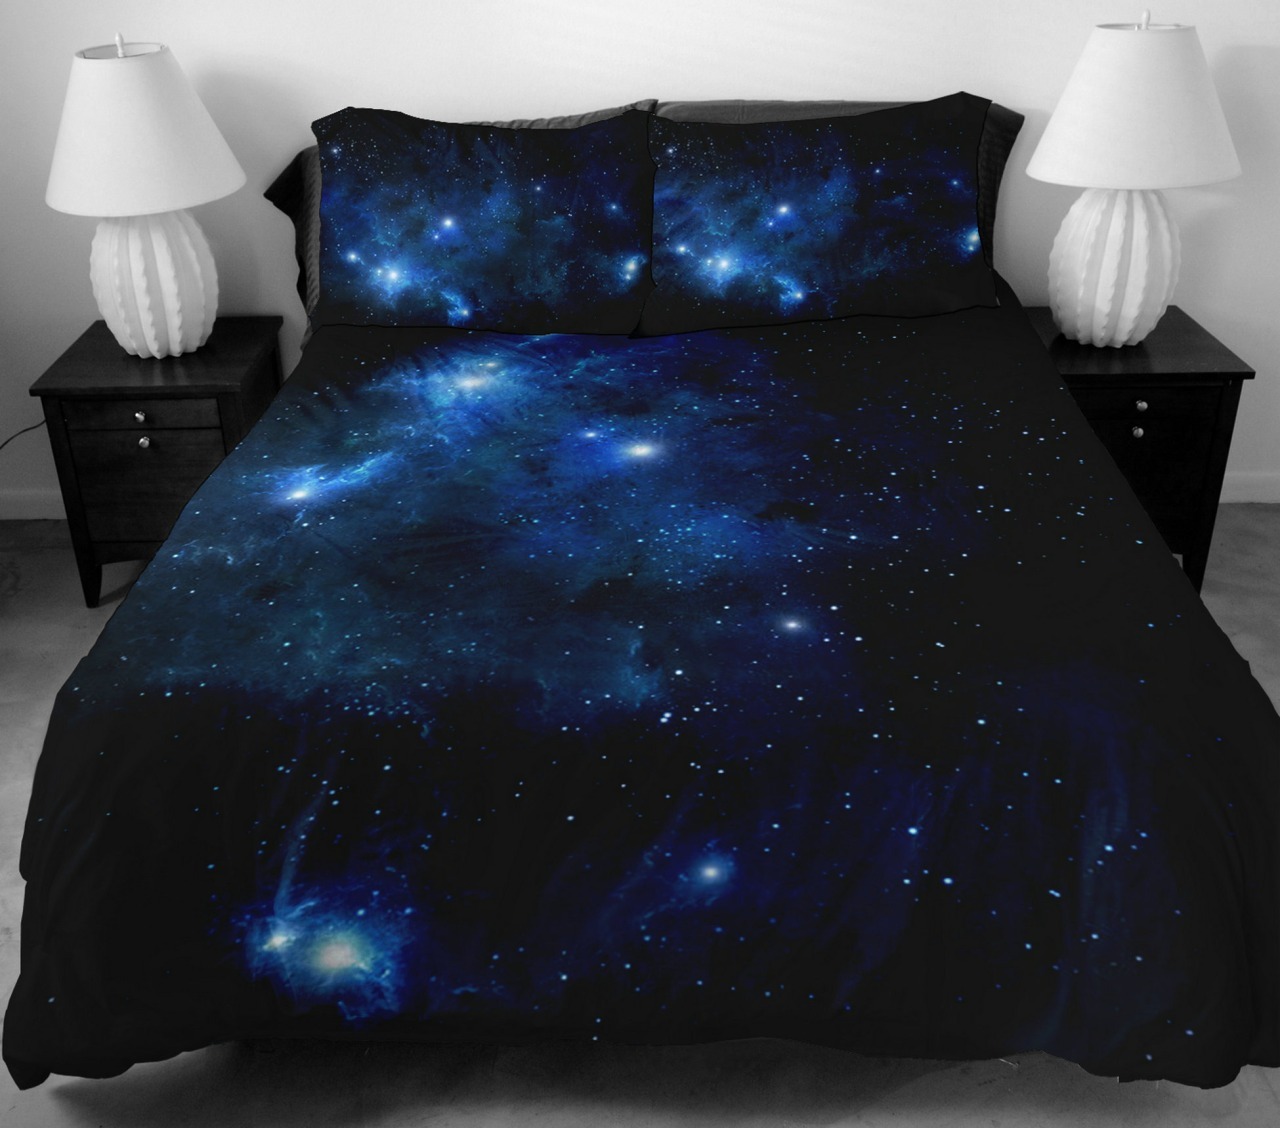 imagine-create-repeat:Check out these gorgeous galaxy bed sets by Anlye! http://anlye.com/